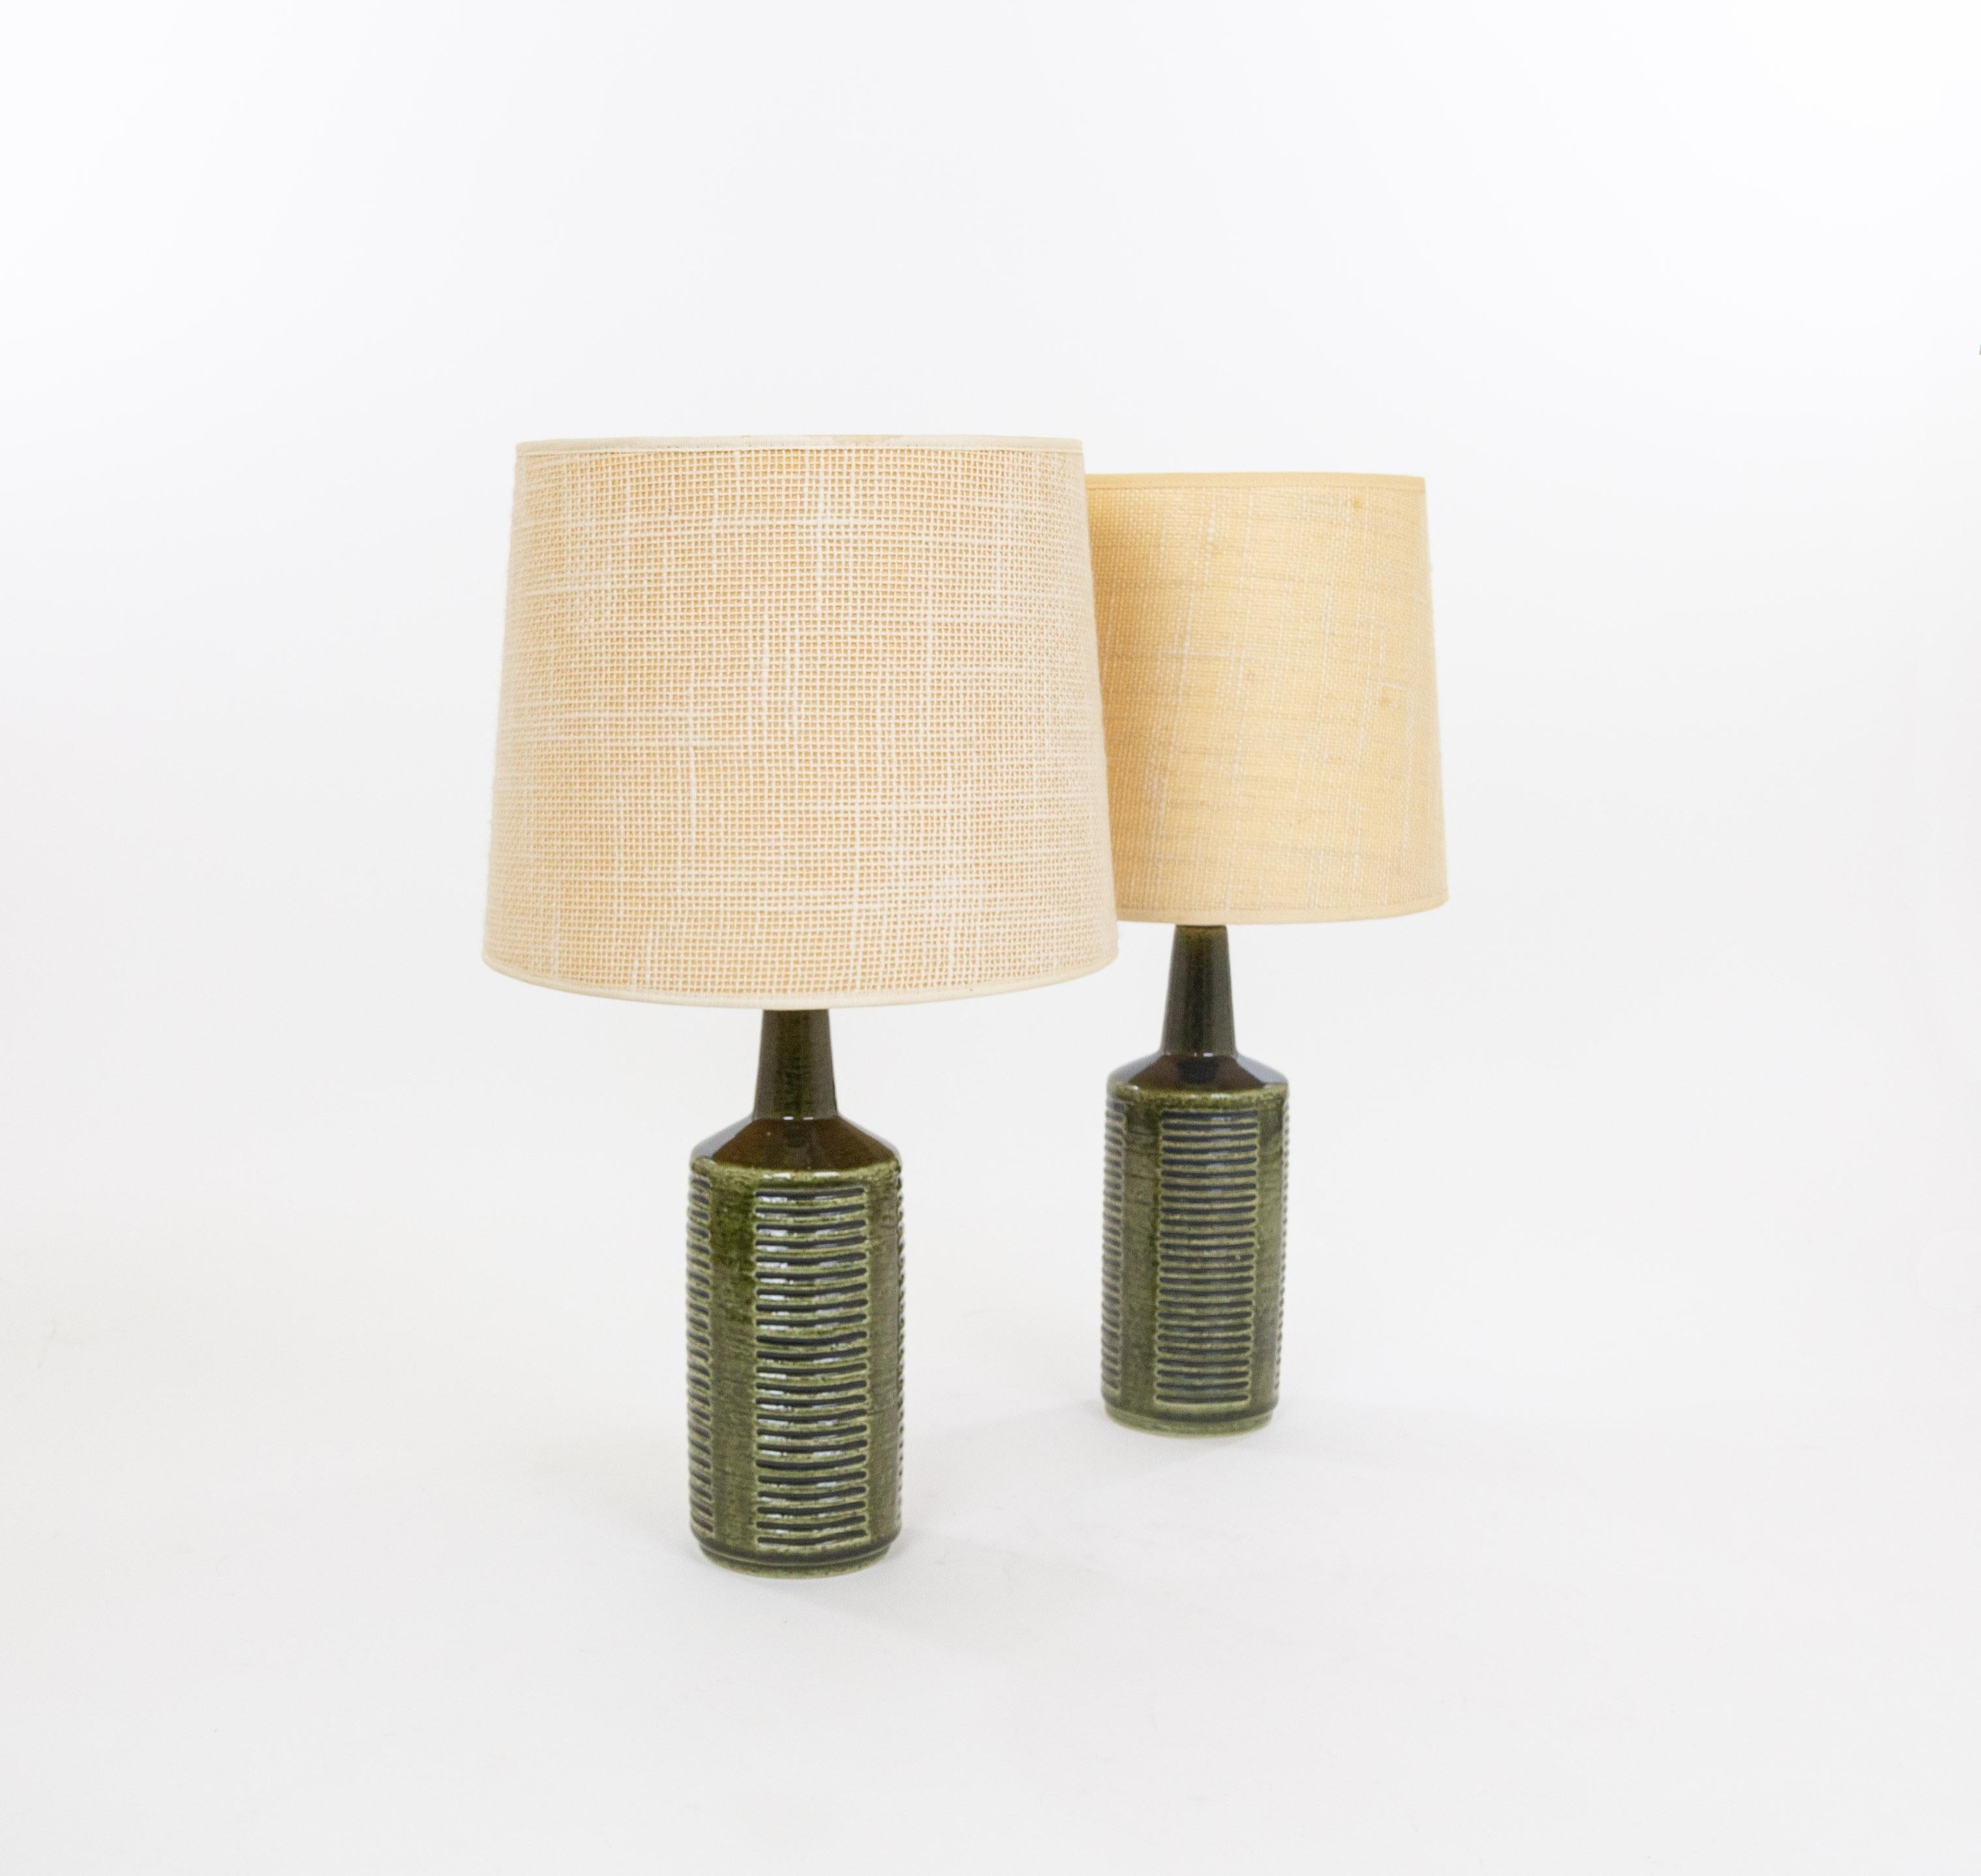 A pair of Model DL/30 table lamps made by Annelise and Per Linnemann-Schmidt for Palshus in the 1960s. The colour of both handmade decorated lamps is Green with Blue details. They have impressed, geometric patterns.

The lamps come with their